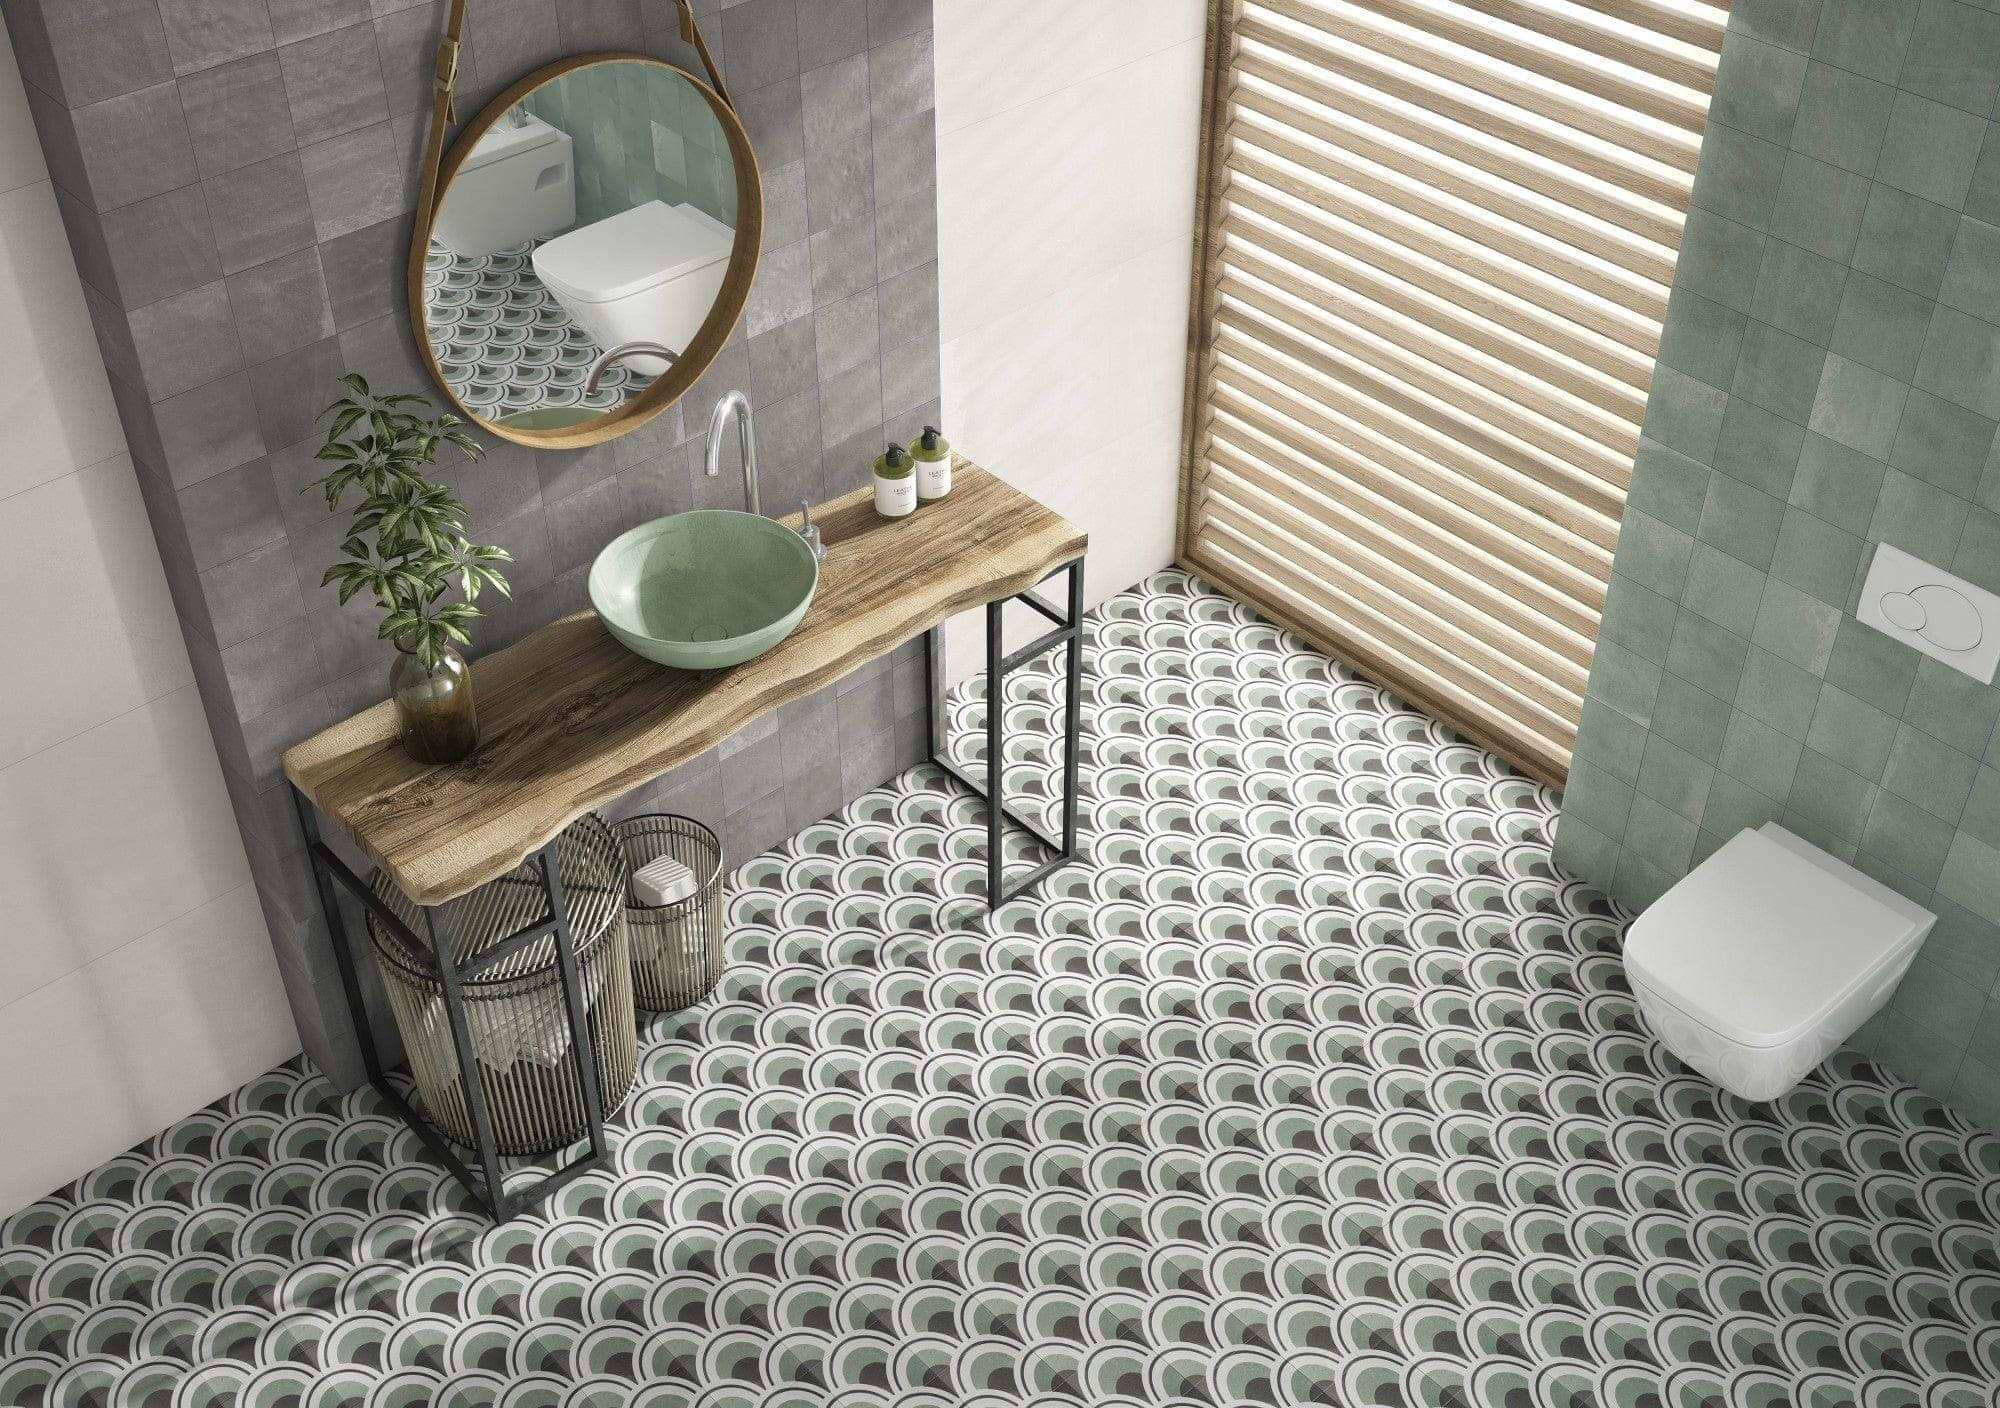 Hyperion Tiles All Products 40 x 40 x 15cm Lavabo Berlin Aquamar